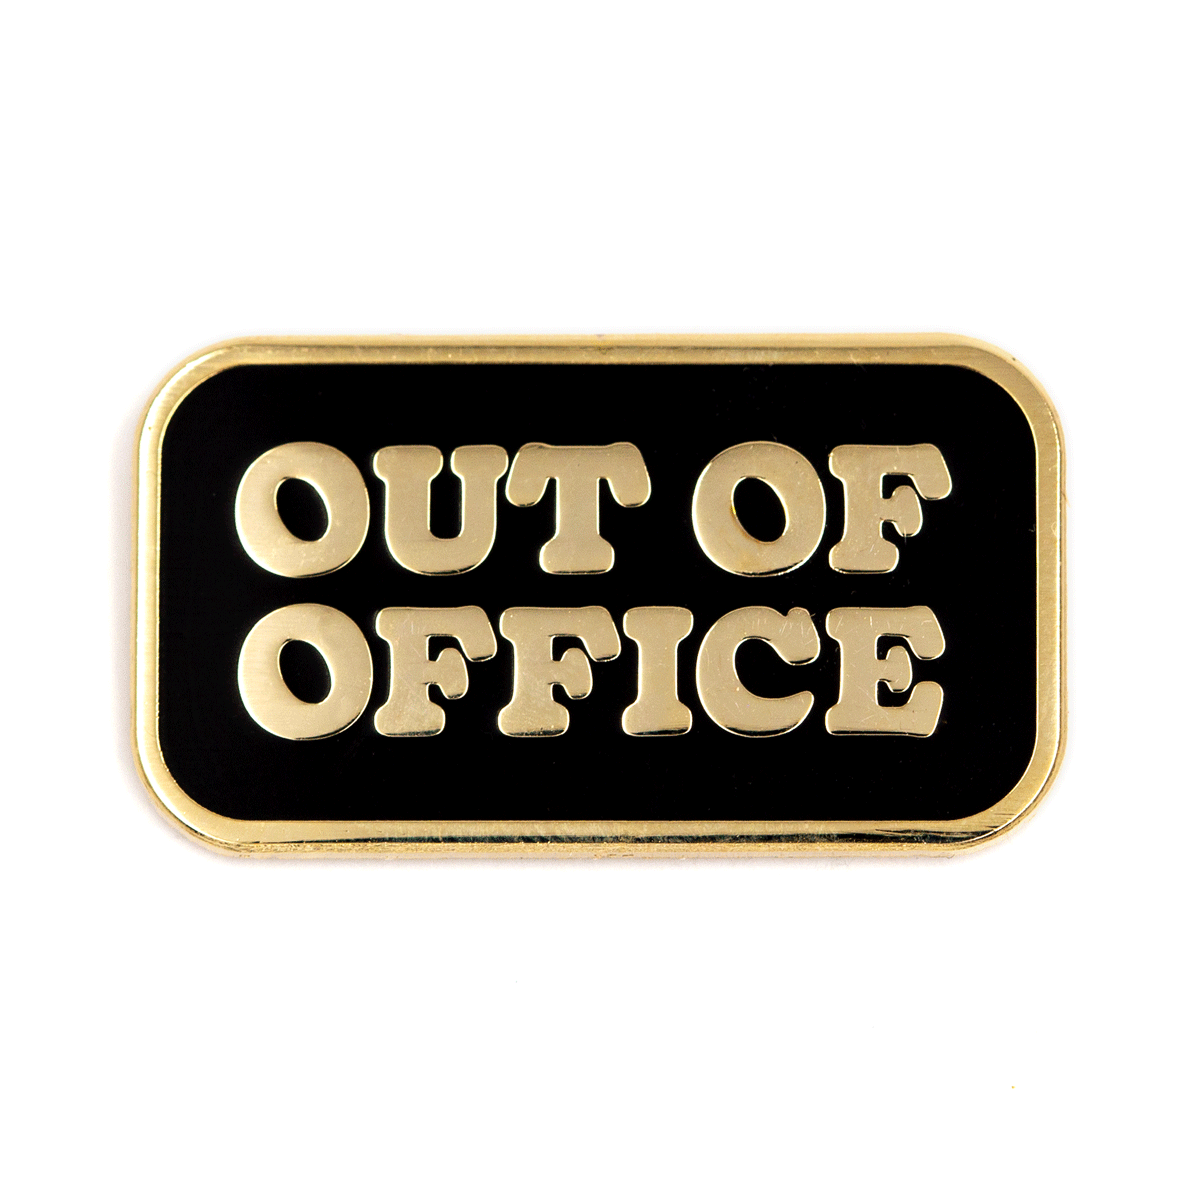 Out Of Office Pin